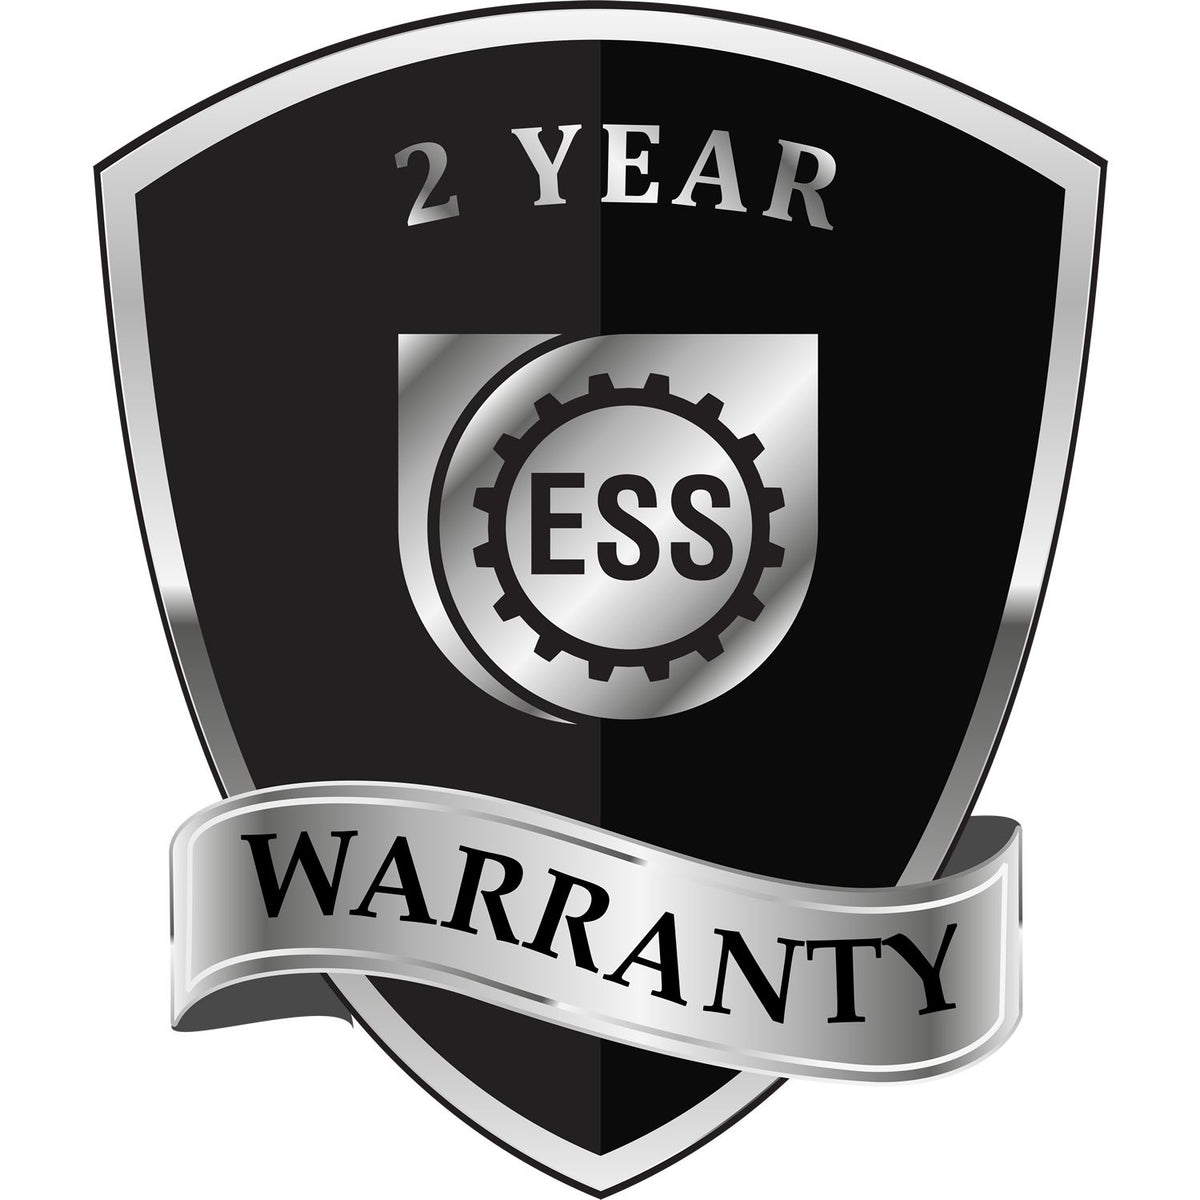 A black and silver badge or emblem showing warranty information for the Hybrid Indiana Geologist Seal